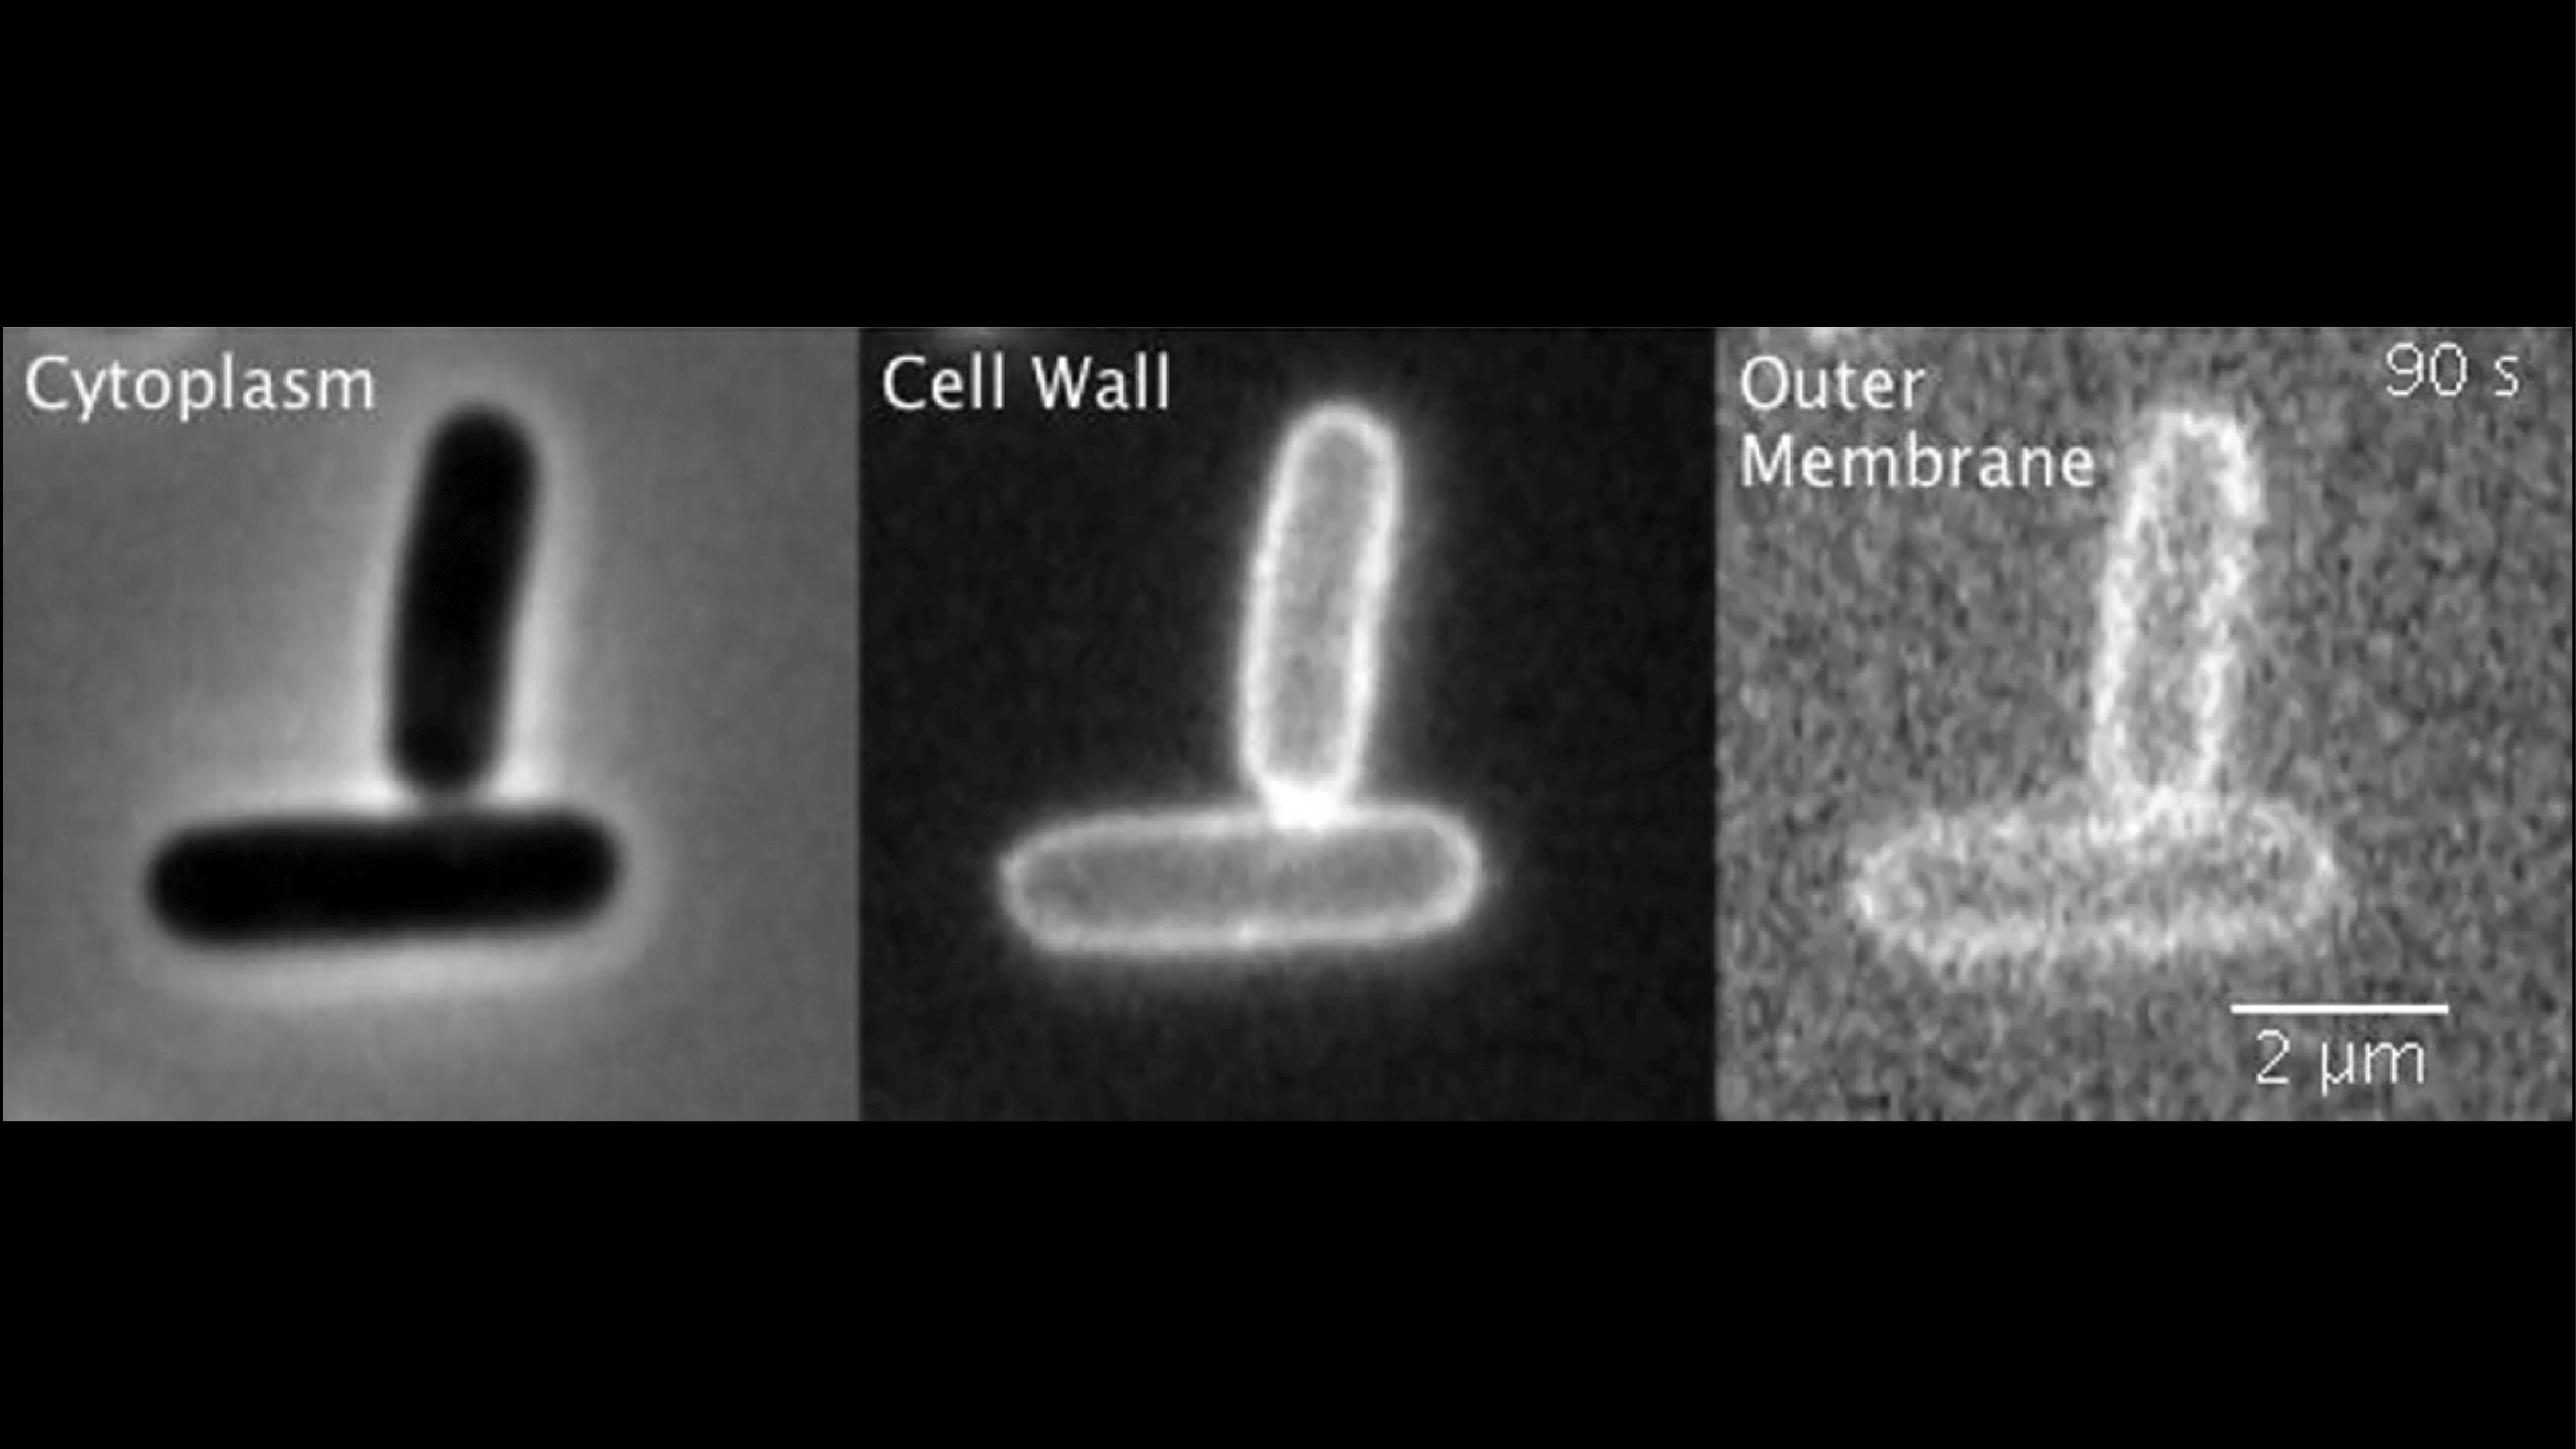 E. coli cells missing both their stiff outer membrane and their cell wall implode during division. A new study led by researchers at the Allen Discovery Center at Stanford University has found that the outer membrane of Gram-negative bacteria has important physical properties that had previously gone undiscovered. Movie courtesy of Enrique Rojas, Ph. D., and Nature.